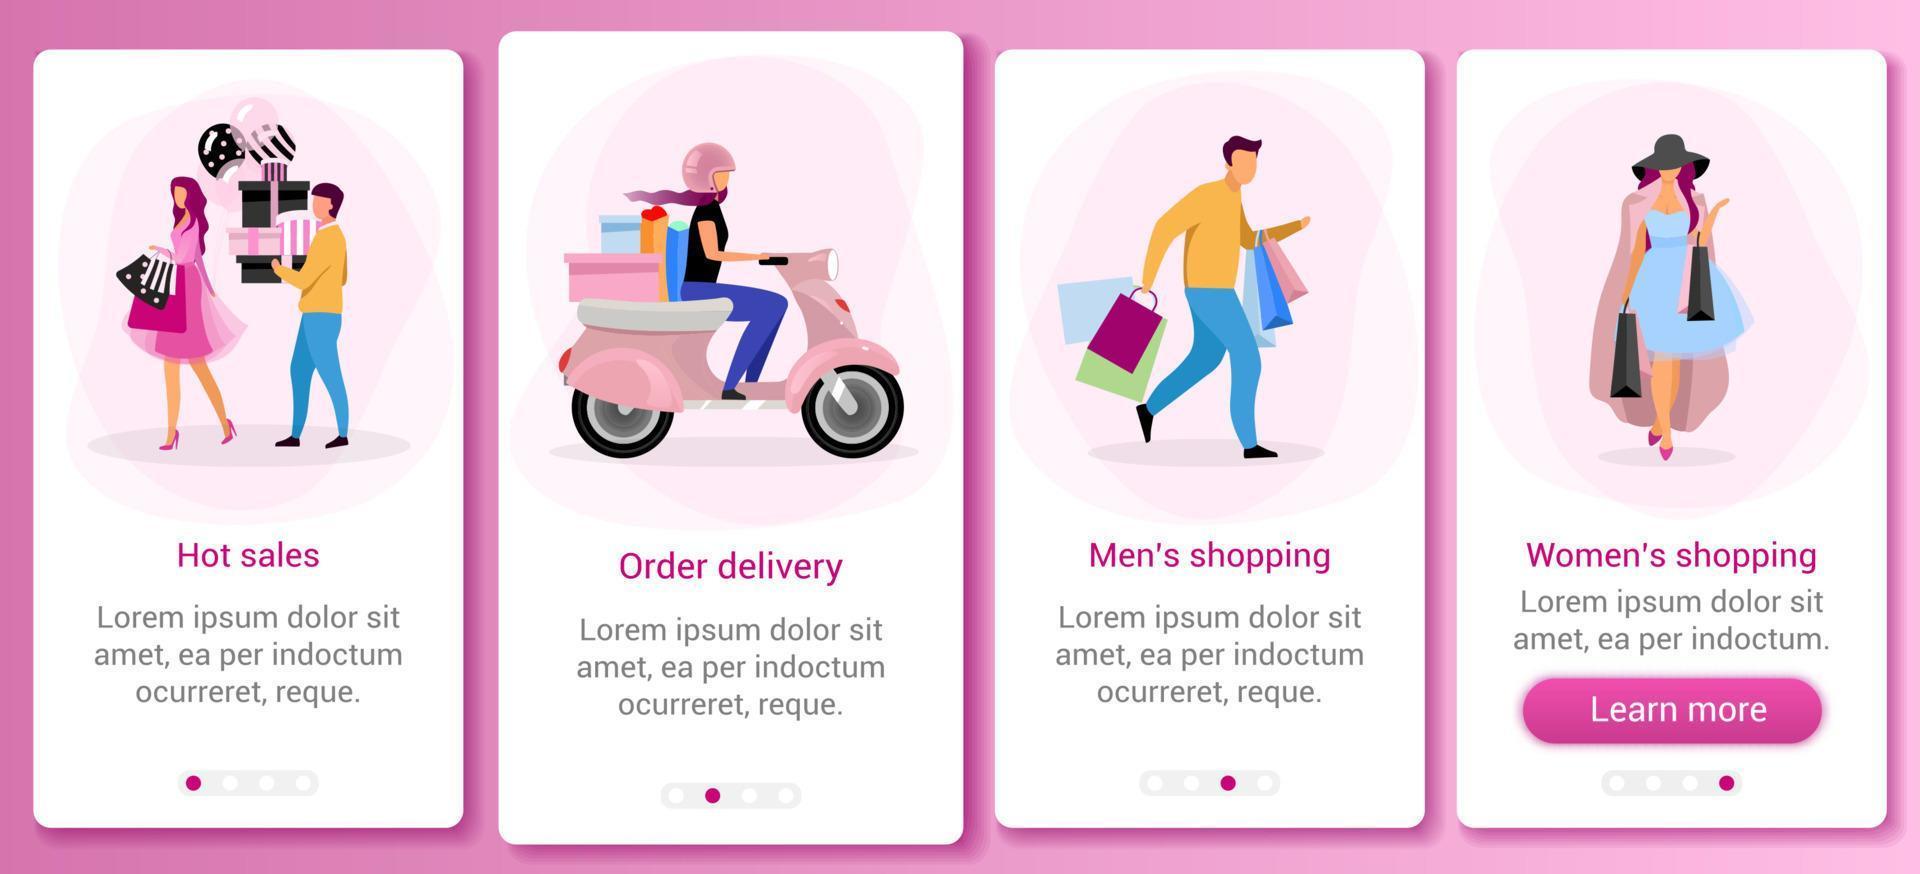 Shopping and retail onboarding mobile app screen template. Hot sales, discounts. Doing purchases. Walkthrough website steps with flat characters. UX, UI, GUI smartphone cartoon interface concept vector